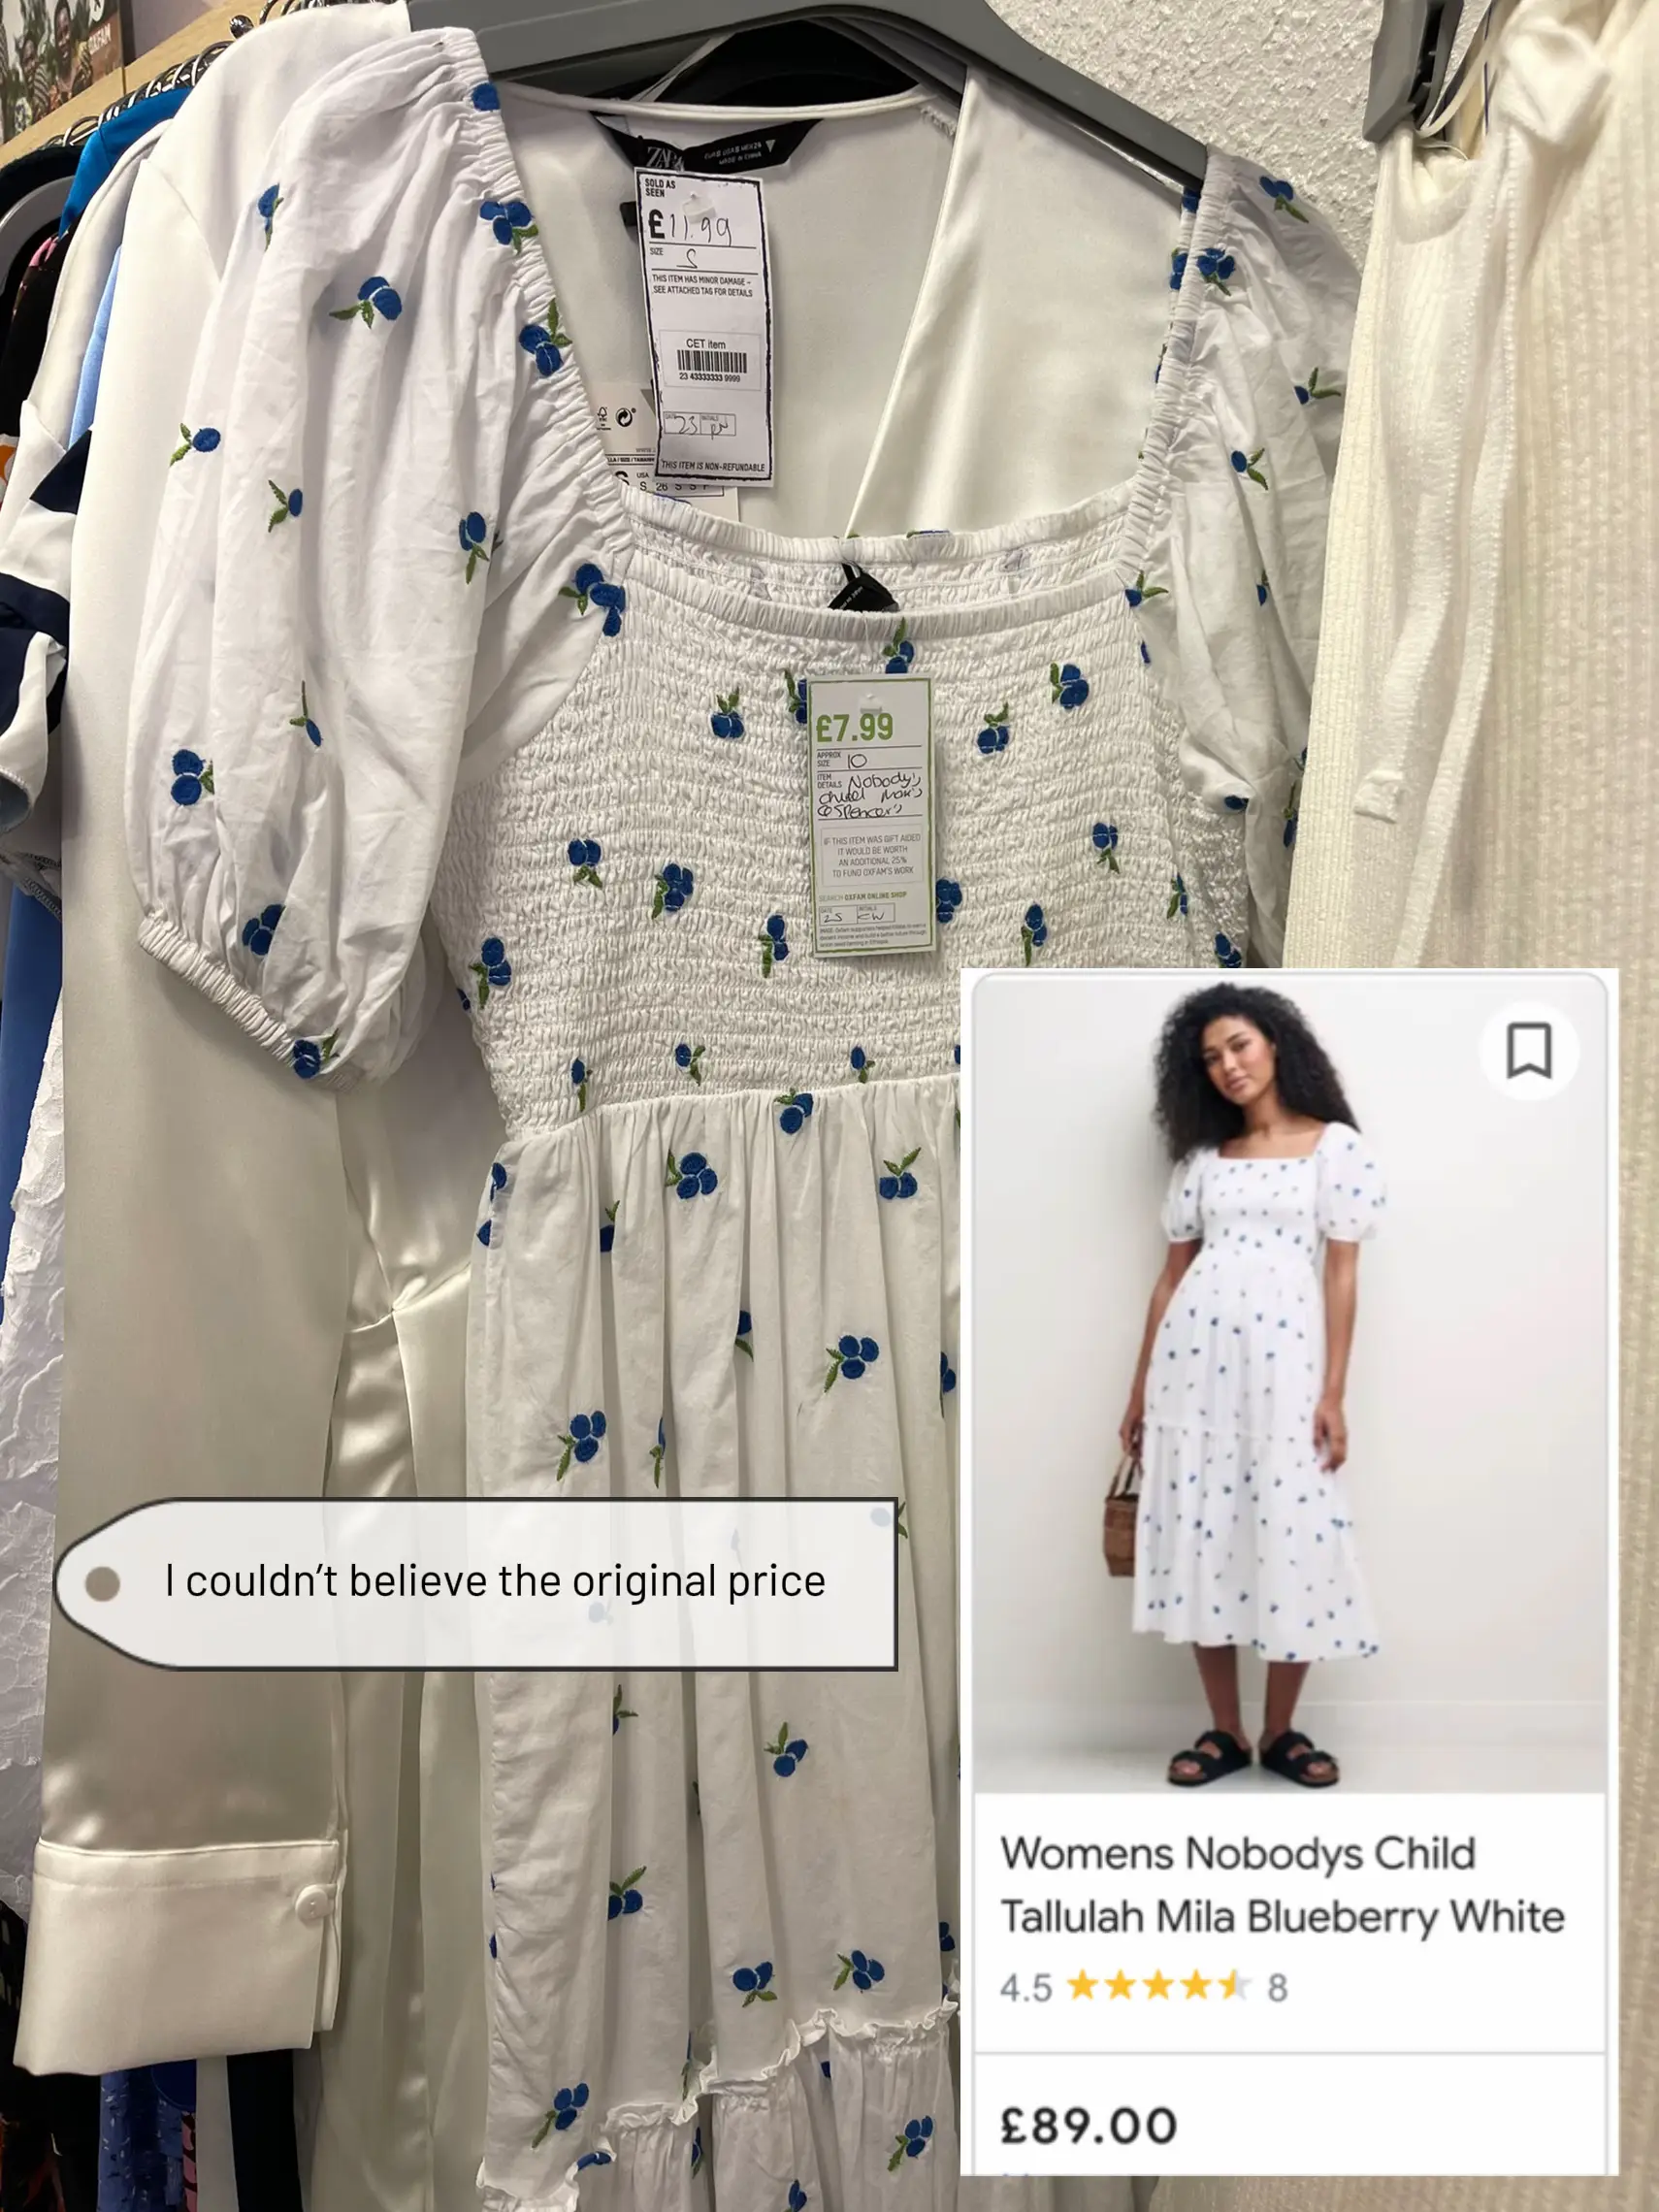 I did a huge Tesco clothing haul - gorgeous summer dress looks so good  nobody believes it's F&F